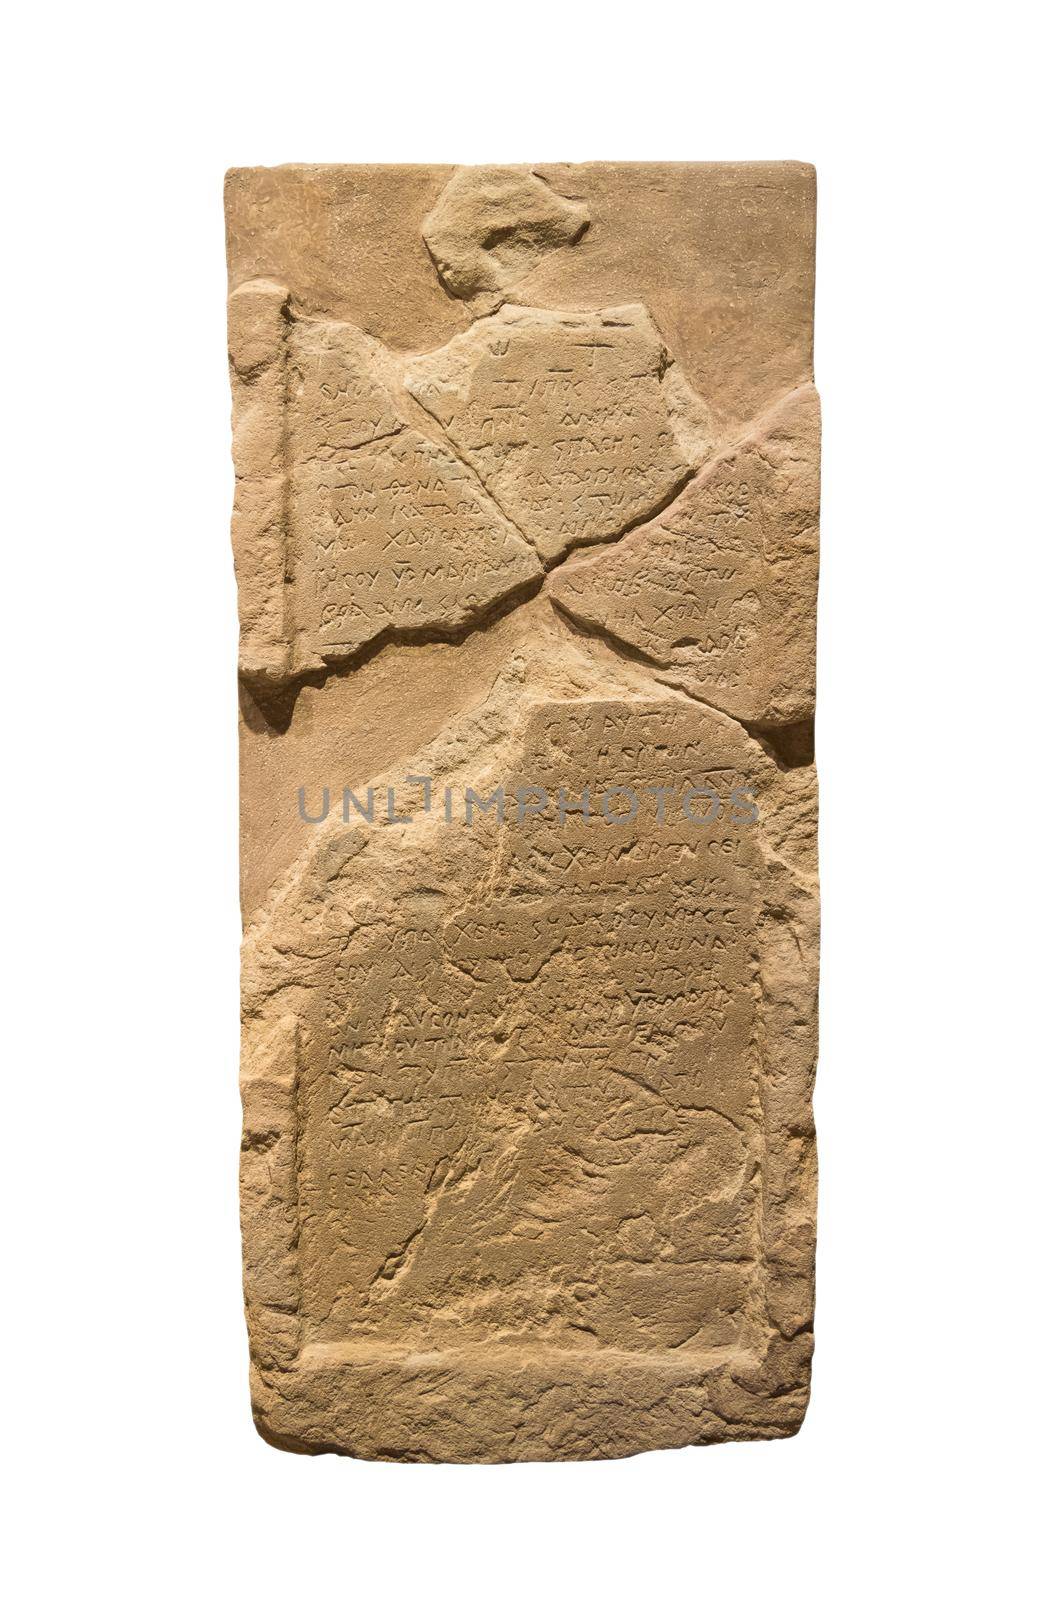 ancient stones with inscriptions isolated on a white background